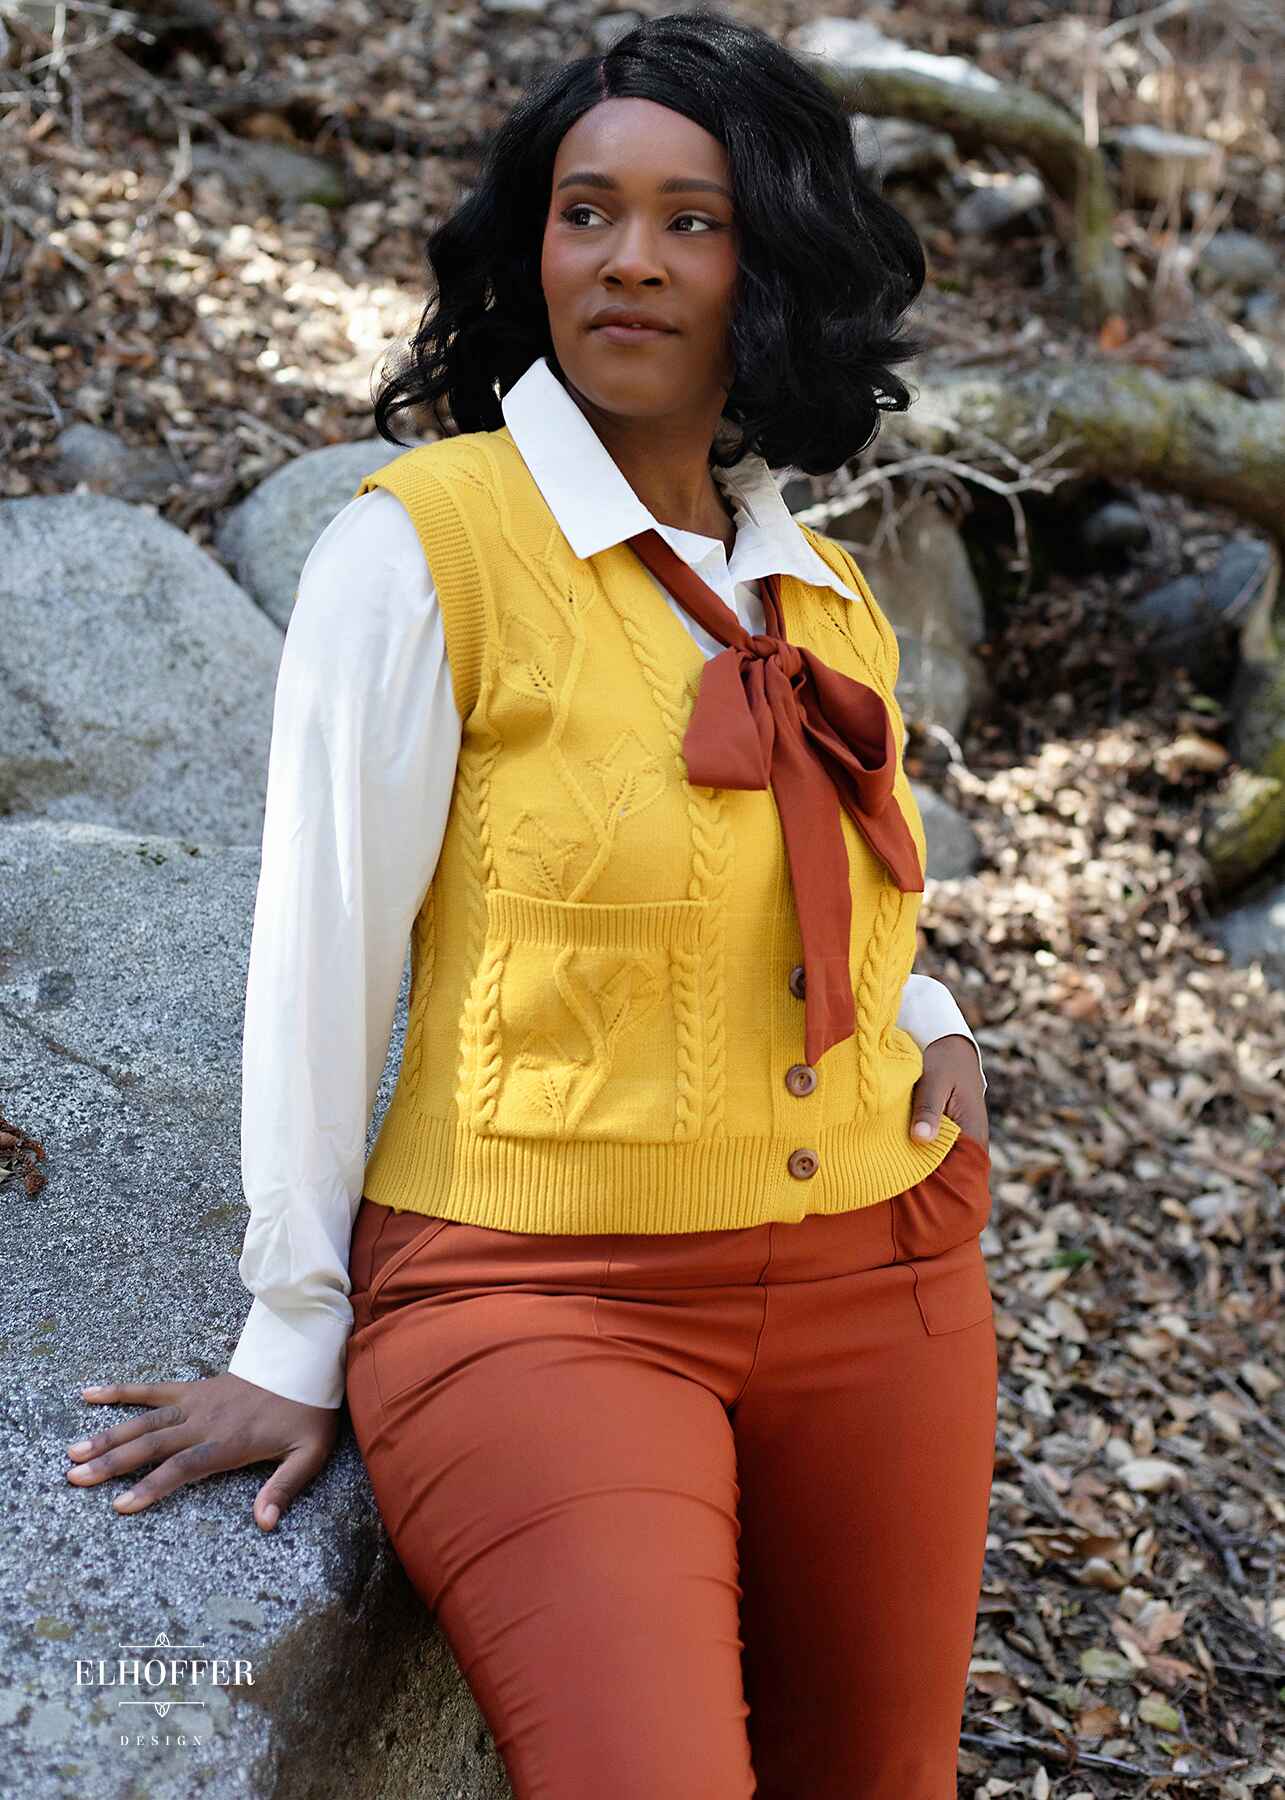 Lynsi, a medium brown skinned M model with shoulder length black hair, is in the woods wearing a golden yellow button up knit vest with a leafy vine and cable knit pattern, light brown buttons, and front pockets.